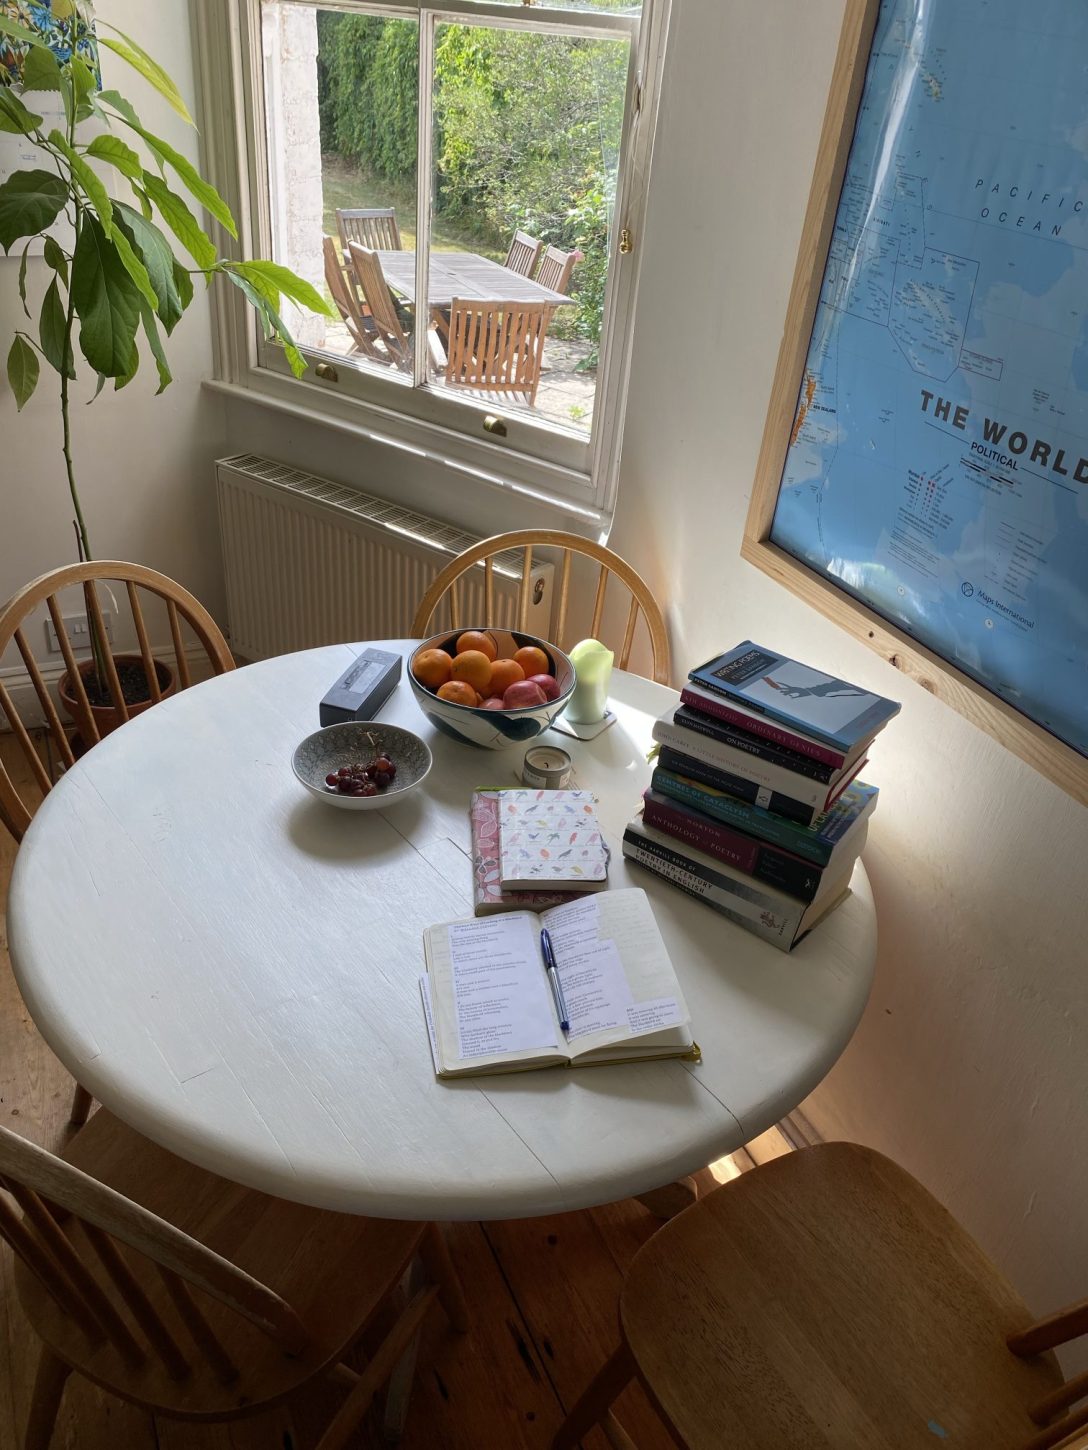 A table containing a pile of poetry books and an open notebook with a pen.